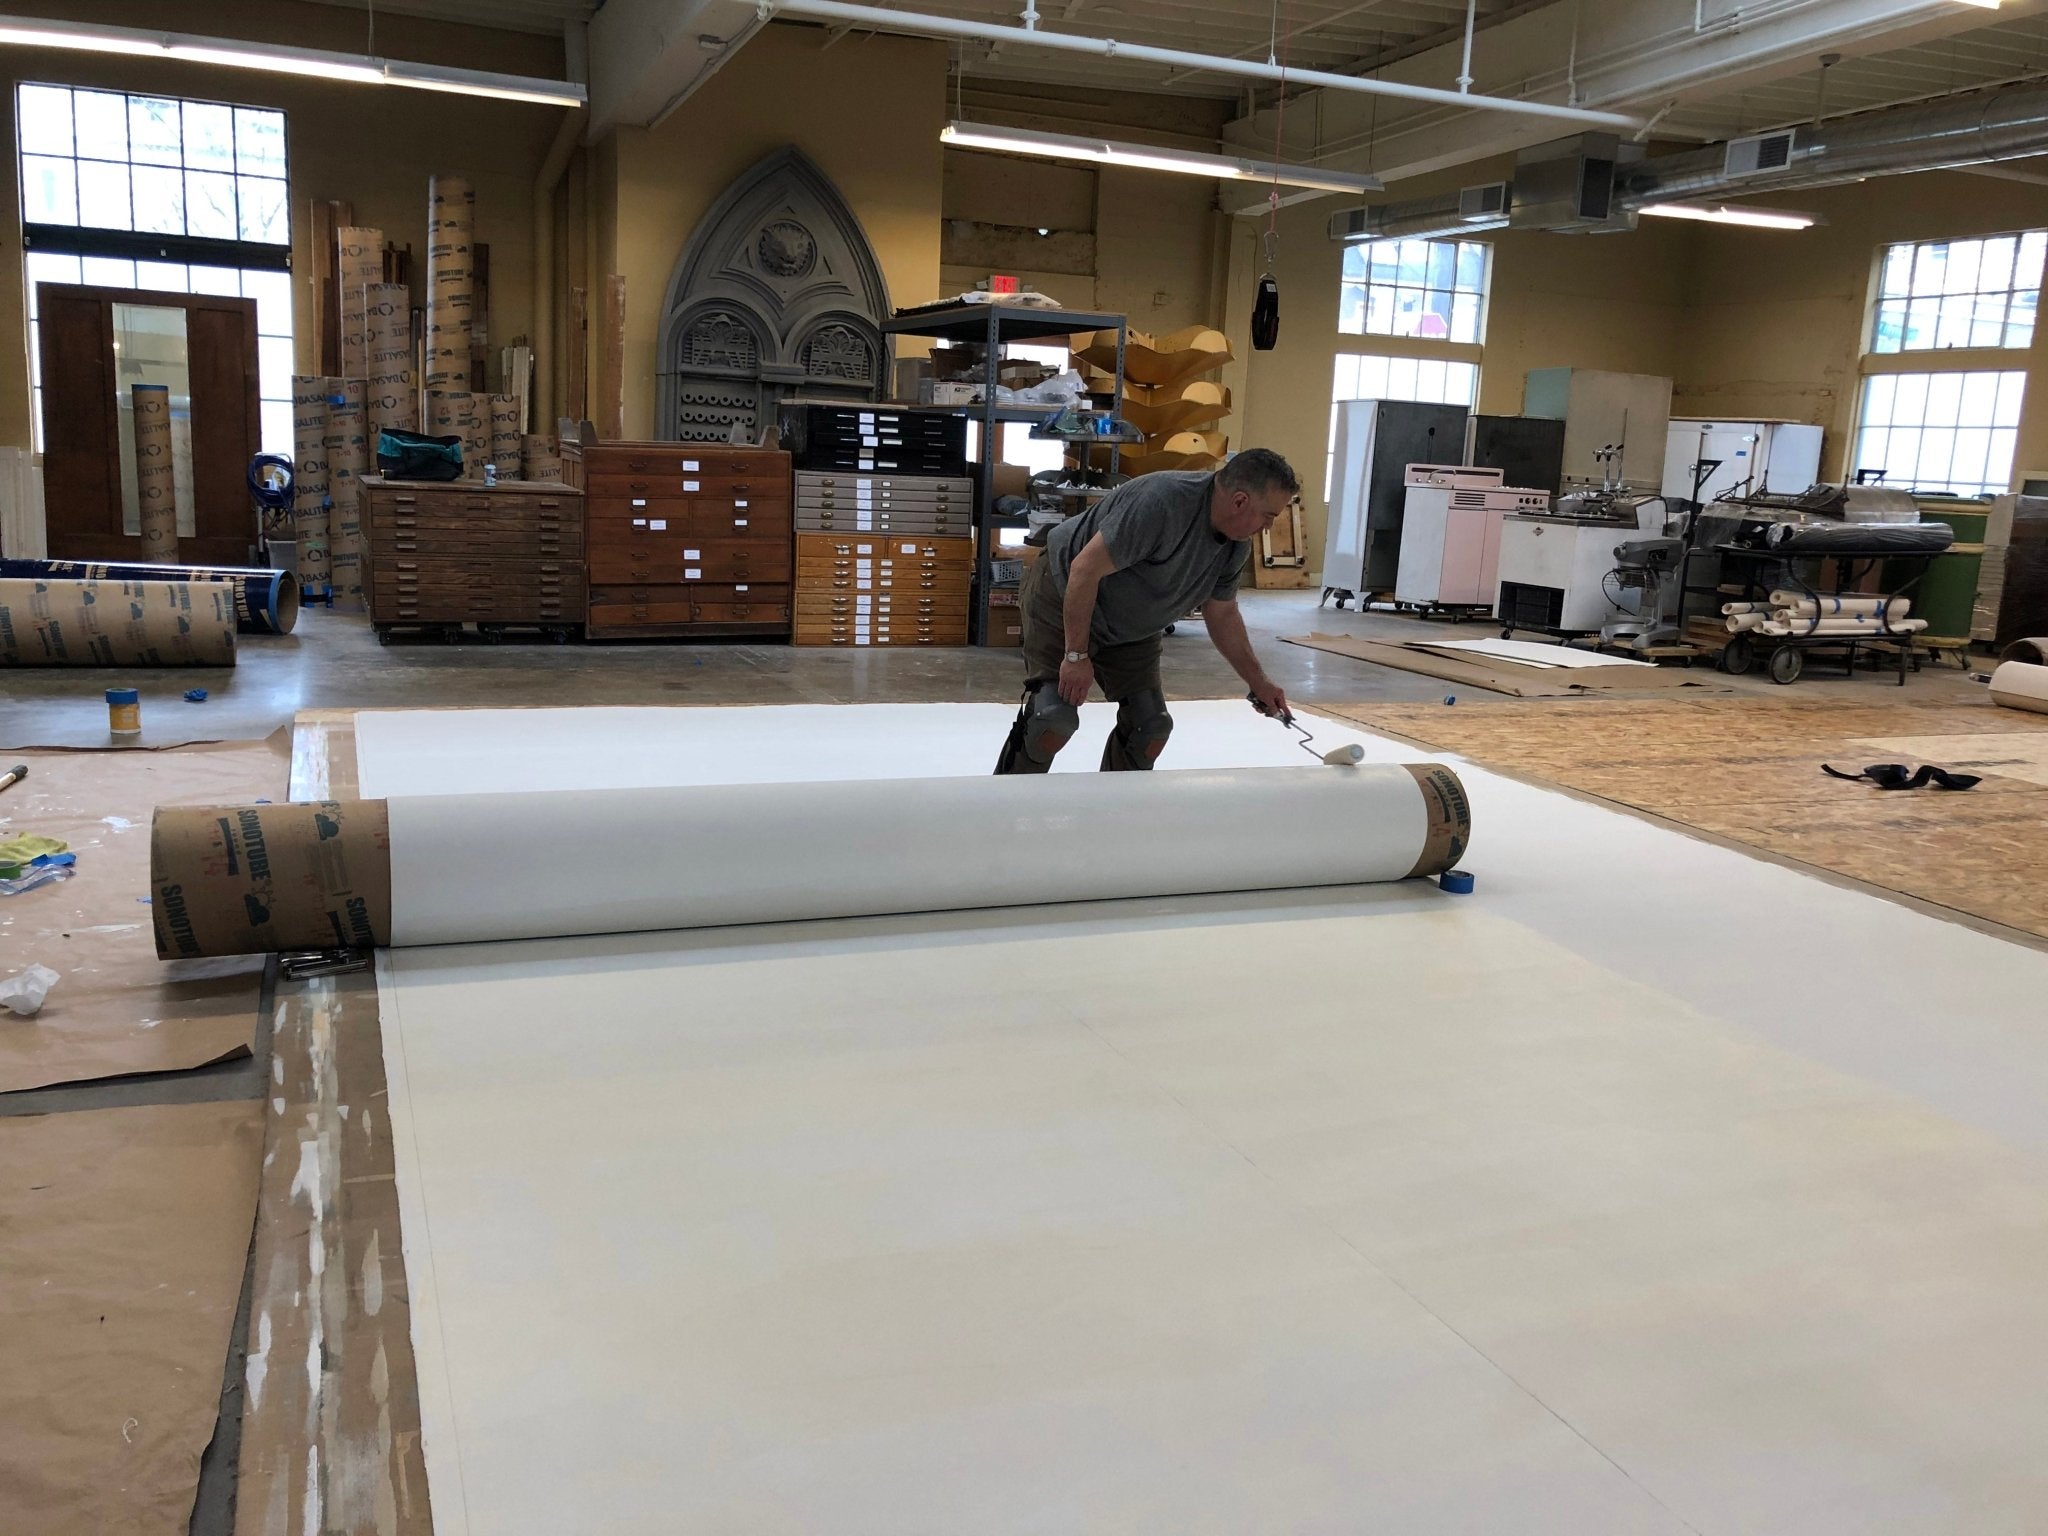 Production image of the construction of the floorcloth base.